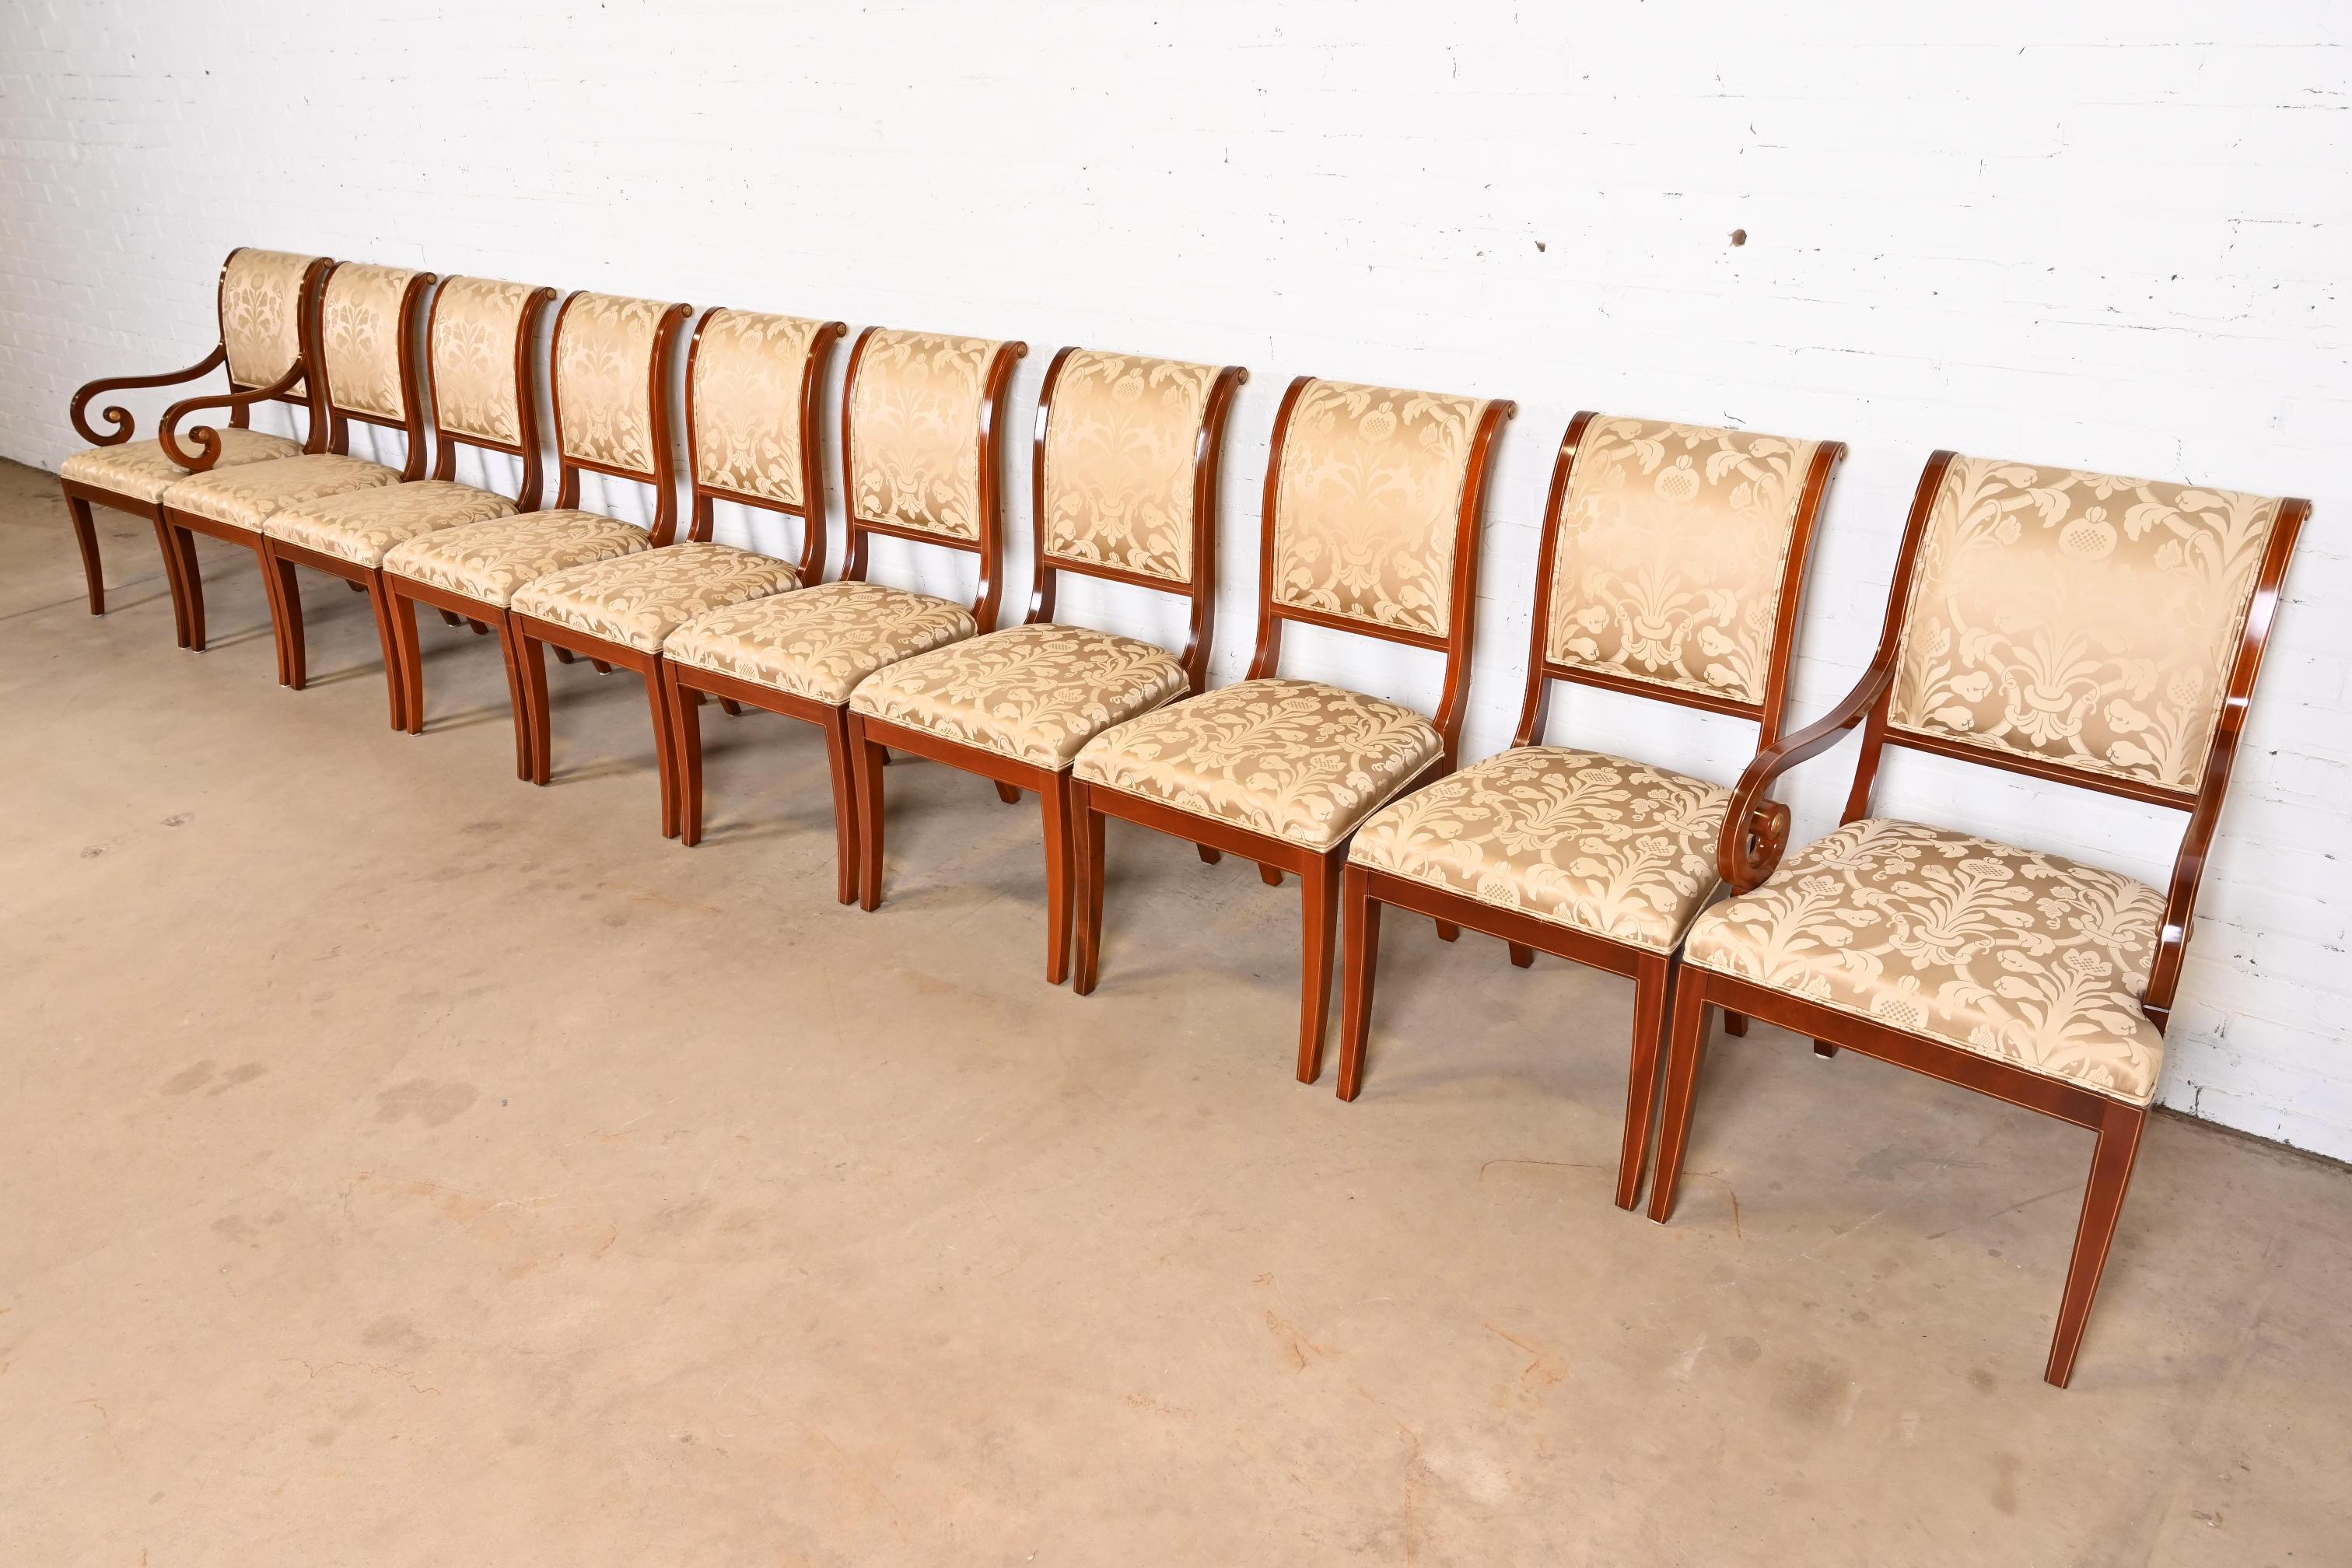 20th Century Kindel Furniture Regency Carved Mahogany and Gold Gilt Dining Chairs, Set of Ten